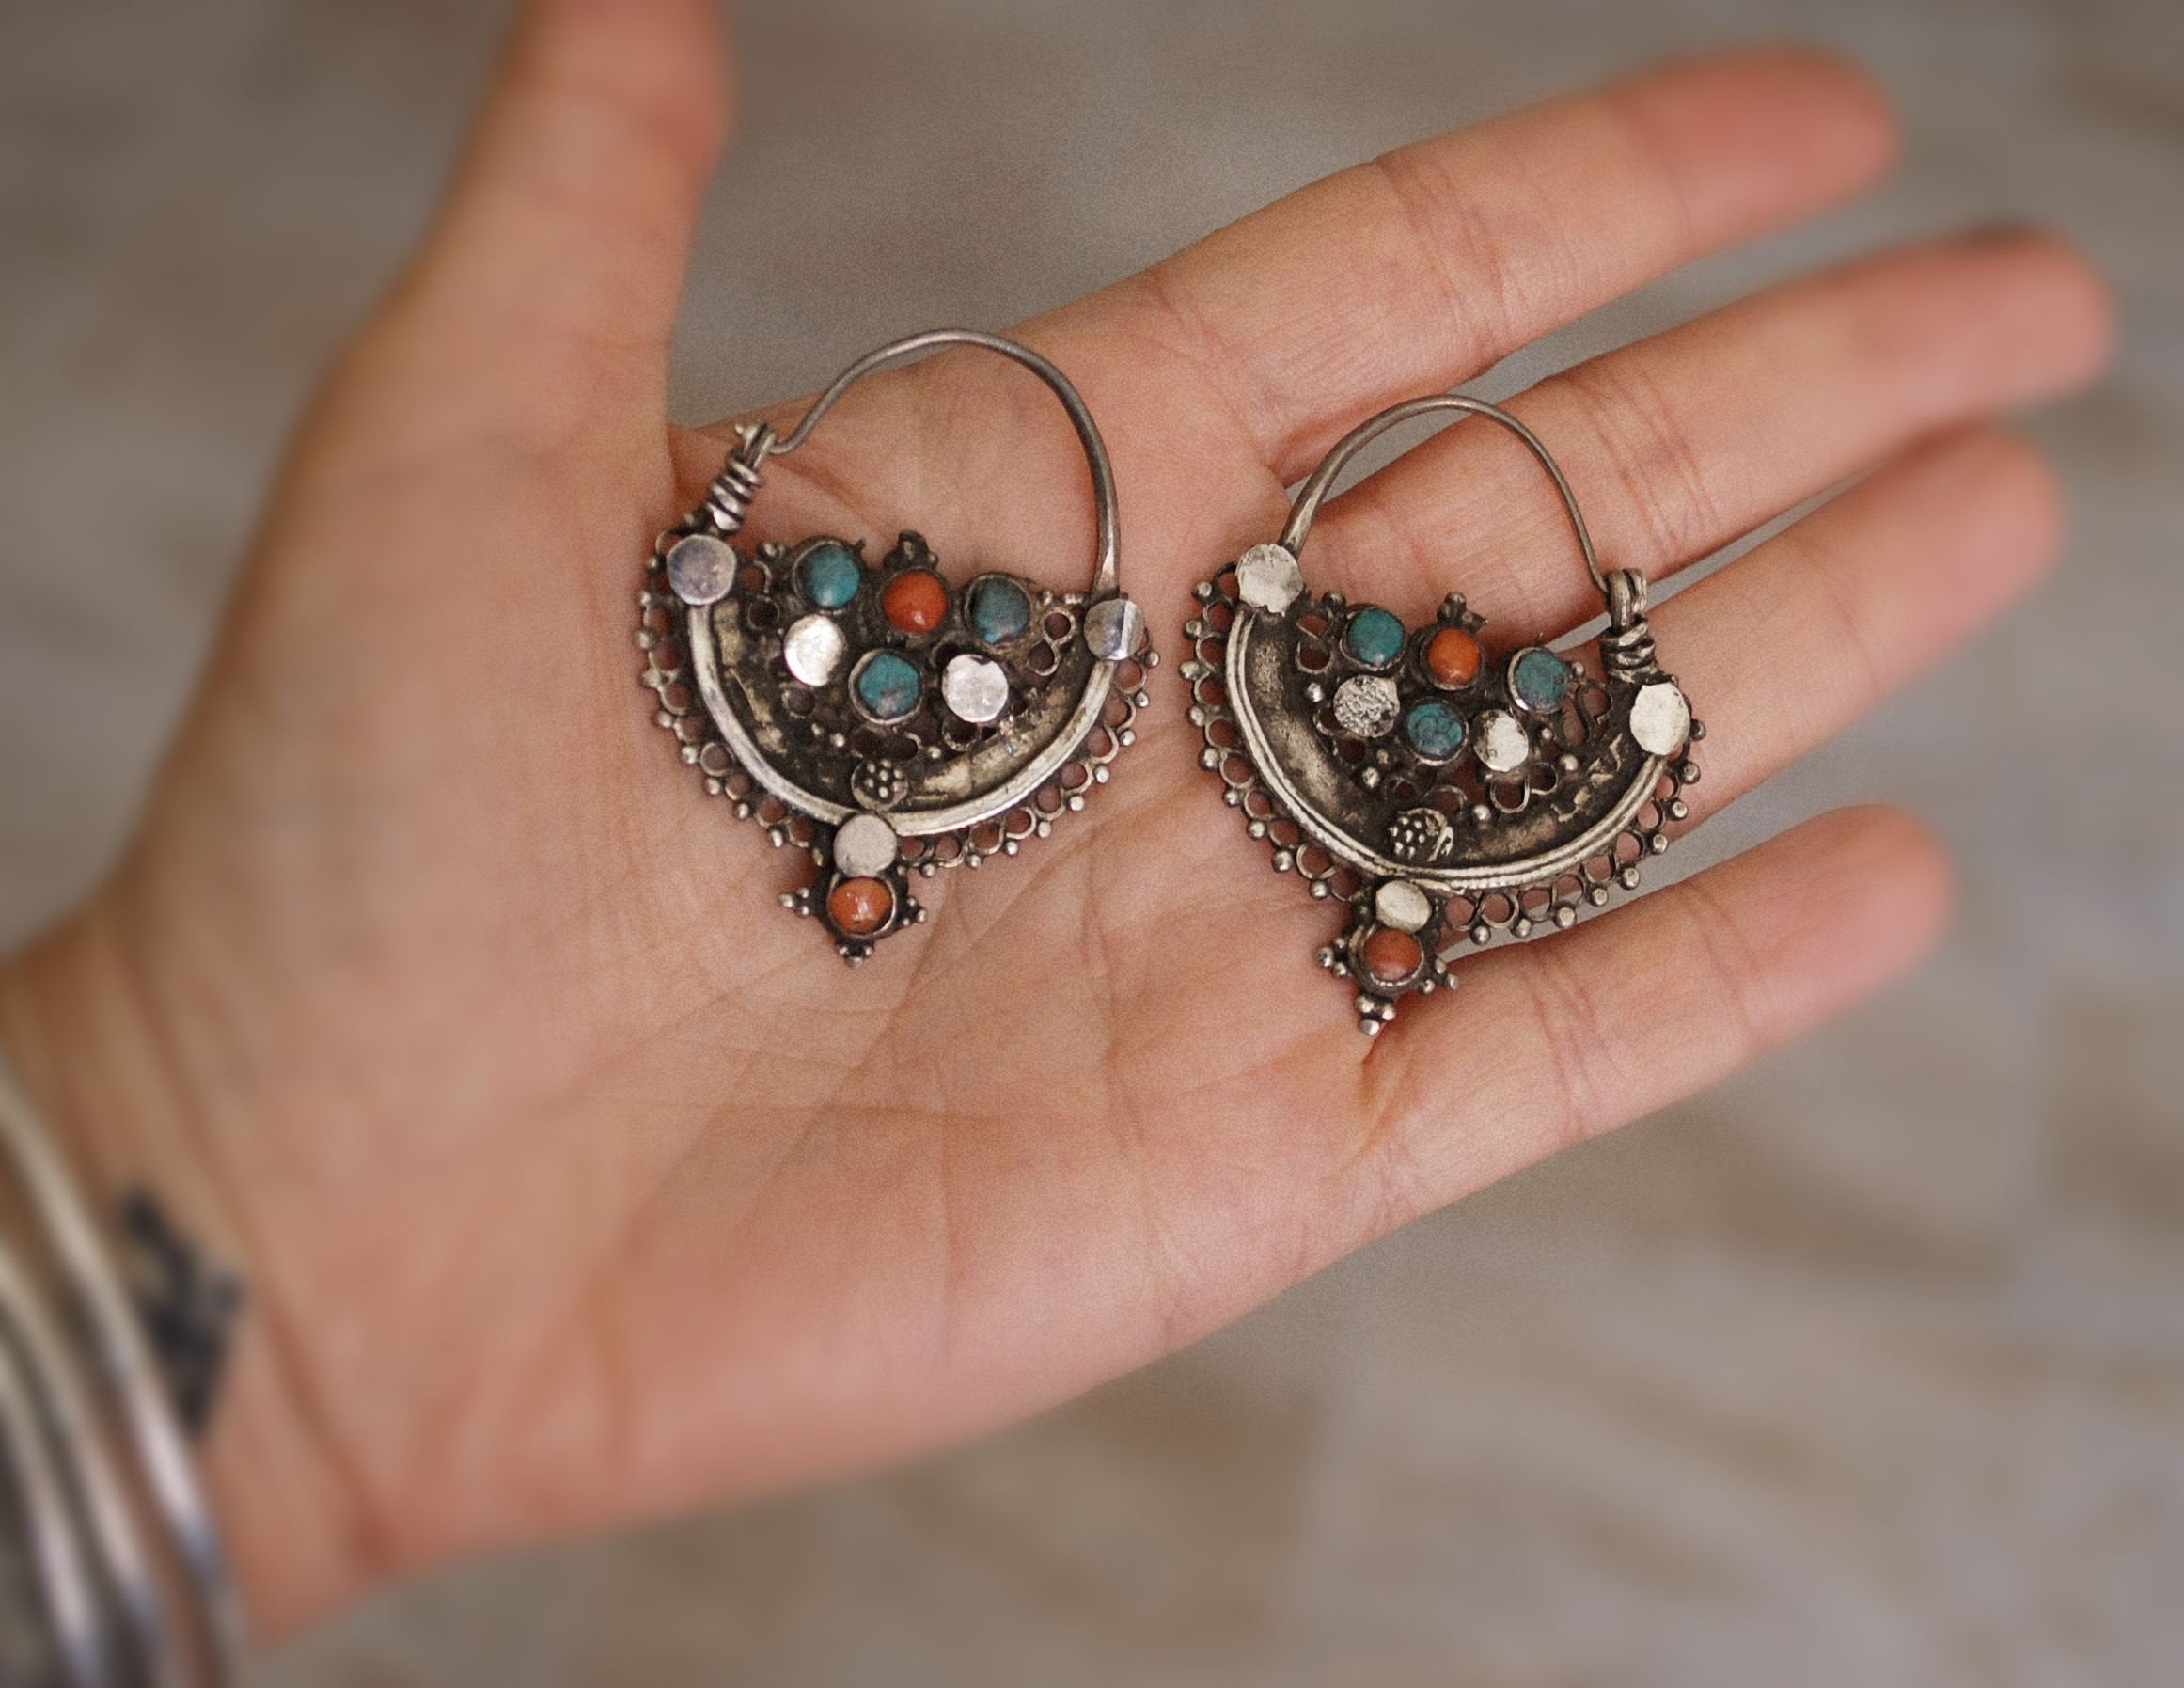 Antique Afghani Hoop Earrings with Turquoise and Coral - Tribal Hoop Earrings - Afghani Earrings - Ethnic Hoop Earrings - Afghani Jewelry